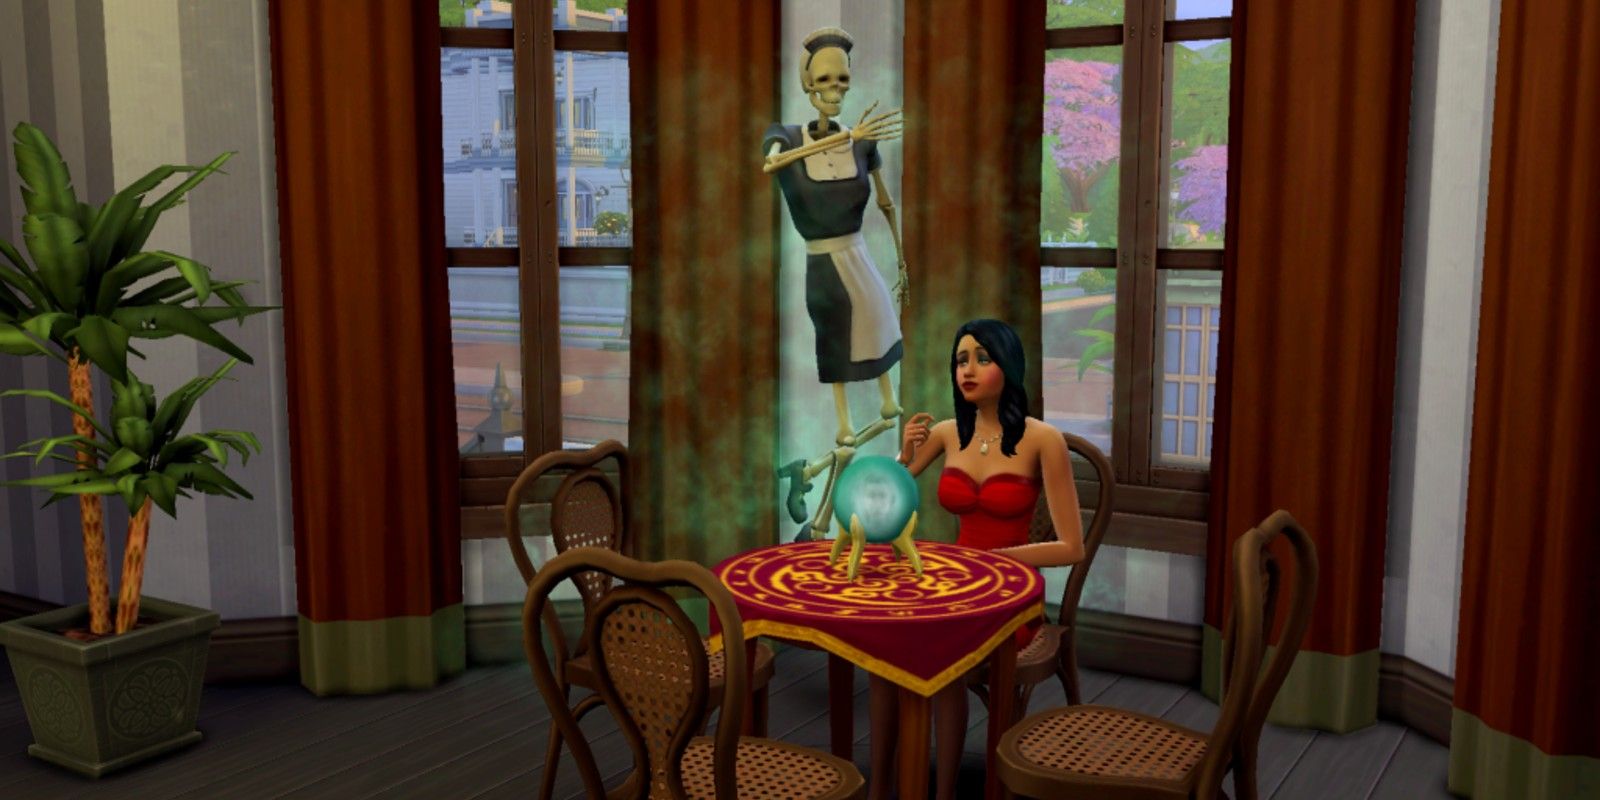 A player summons Bonehilda in The Sims 4: Paranormal Stuff